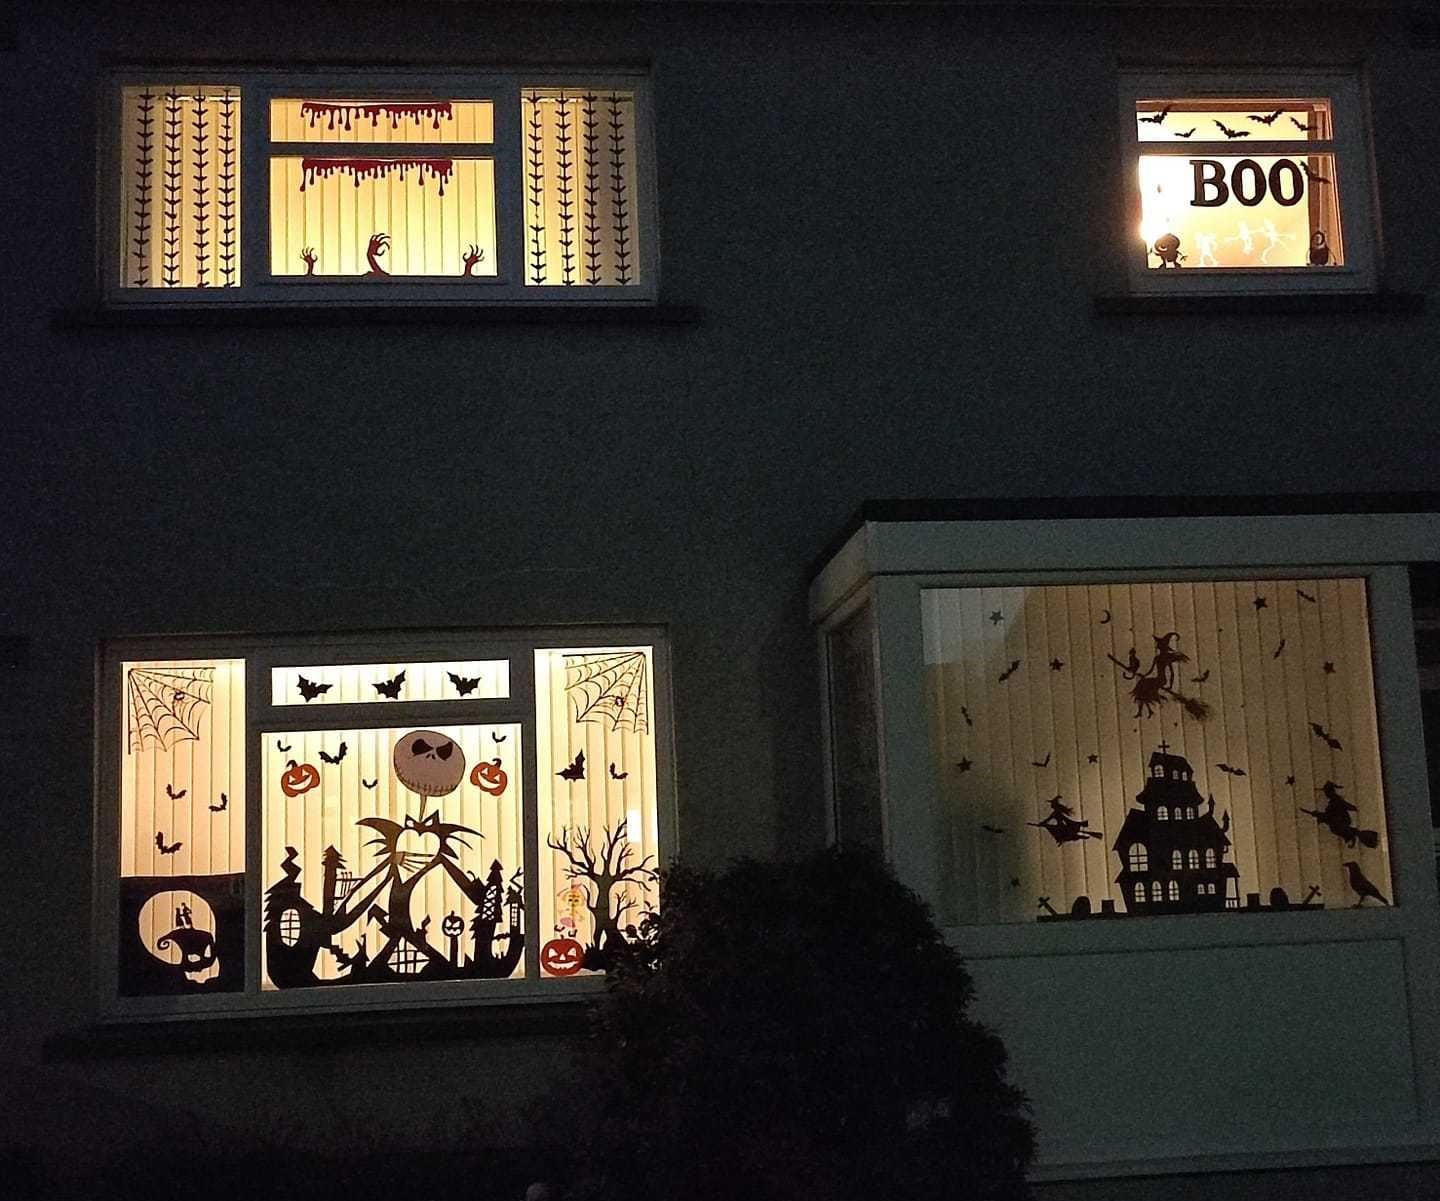 Laura Graves and her daughter Evie decorated all the windows at the front of their home.